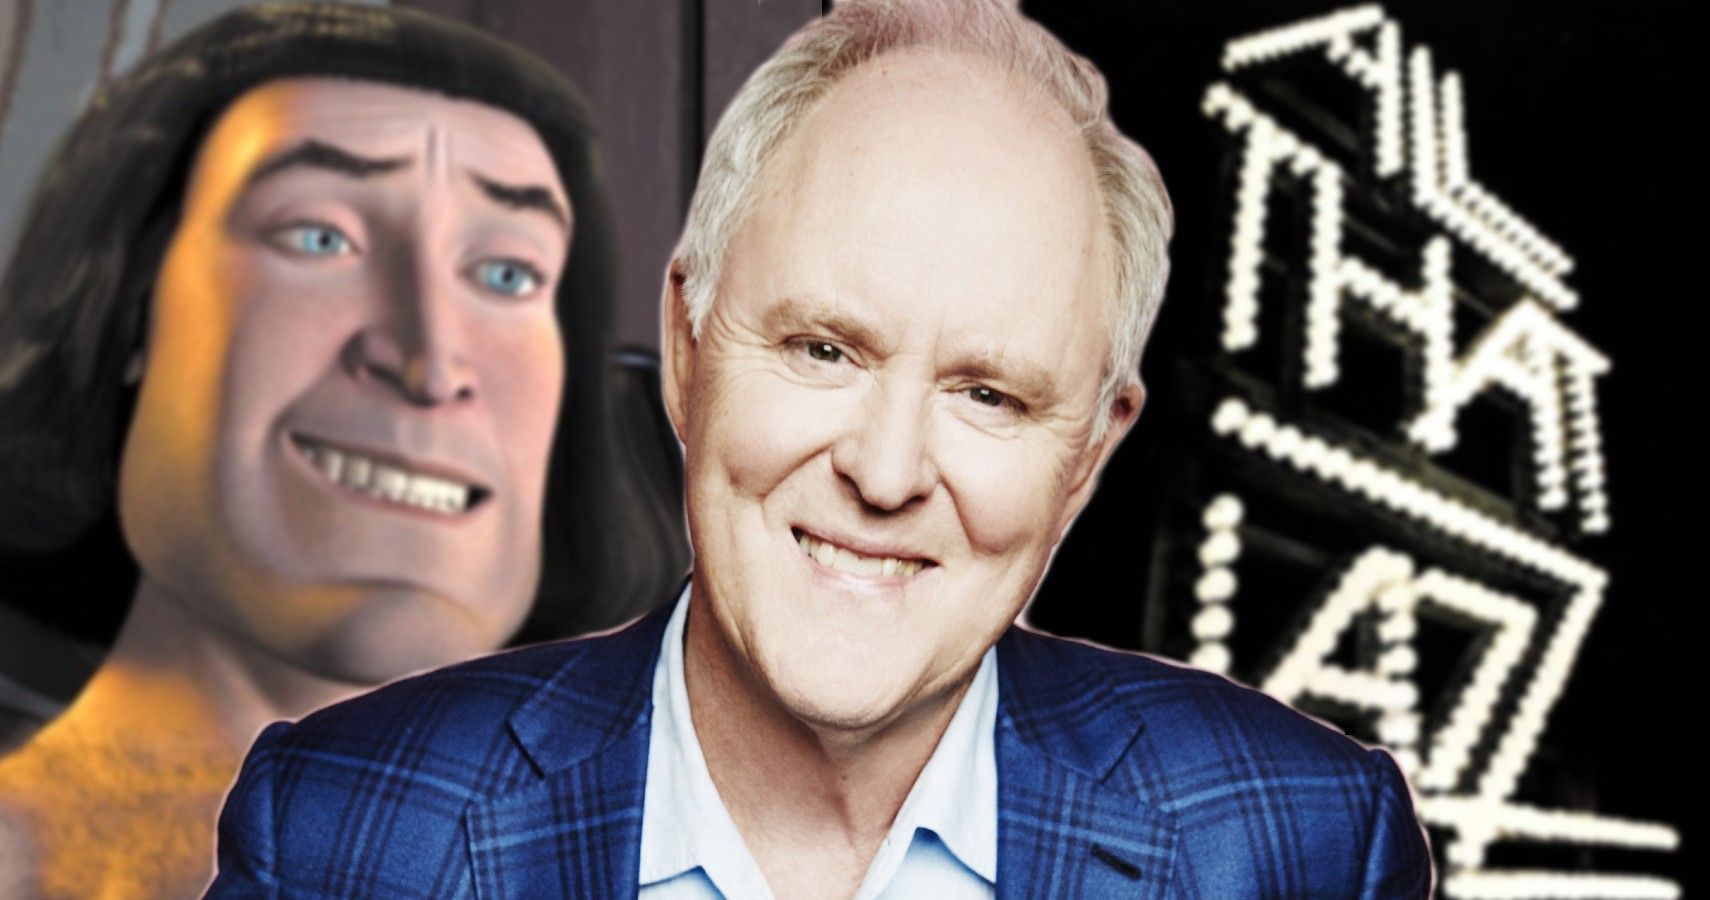 John Lithgow's 10 Best Movies, According To Rotten Tomatoes